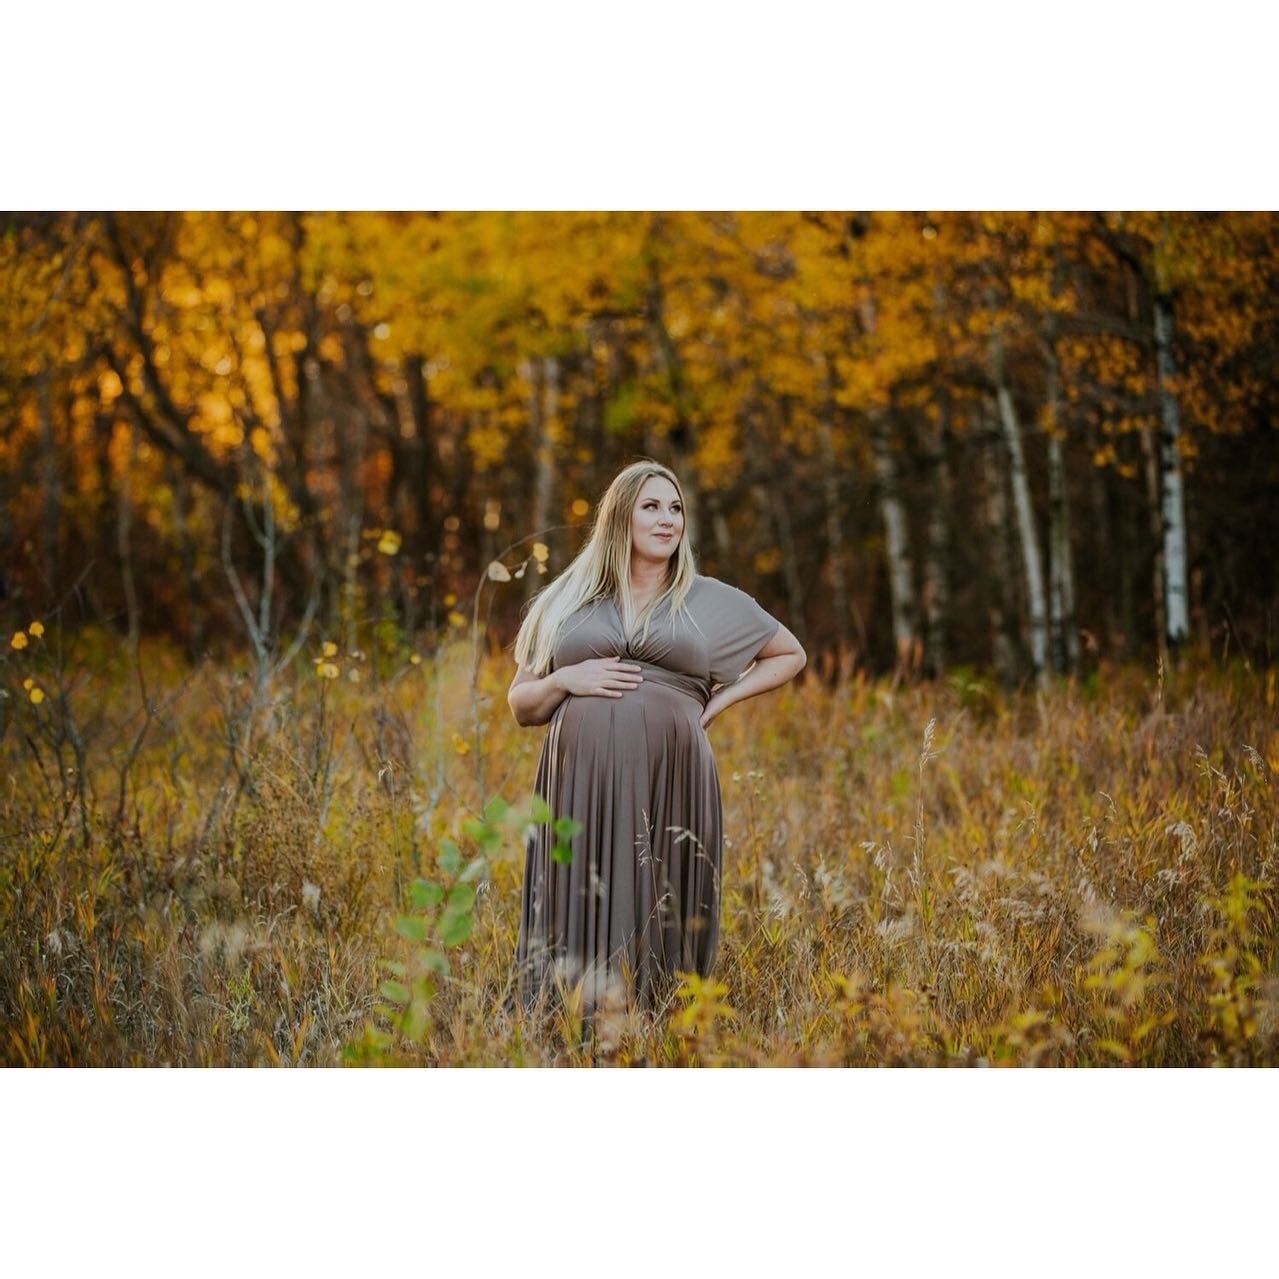 Nice weather is coming, nice weather is coming!! If we keep saying this, it will manifest and happen. NICE WEATHER, is coming!! Haha 
&bull;
#maternityphotography #maternityshoot #baby #maternity #glowing #glowingmomma #instamood